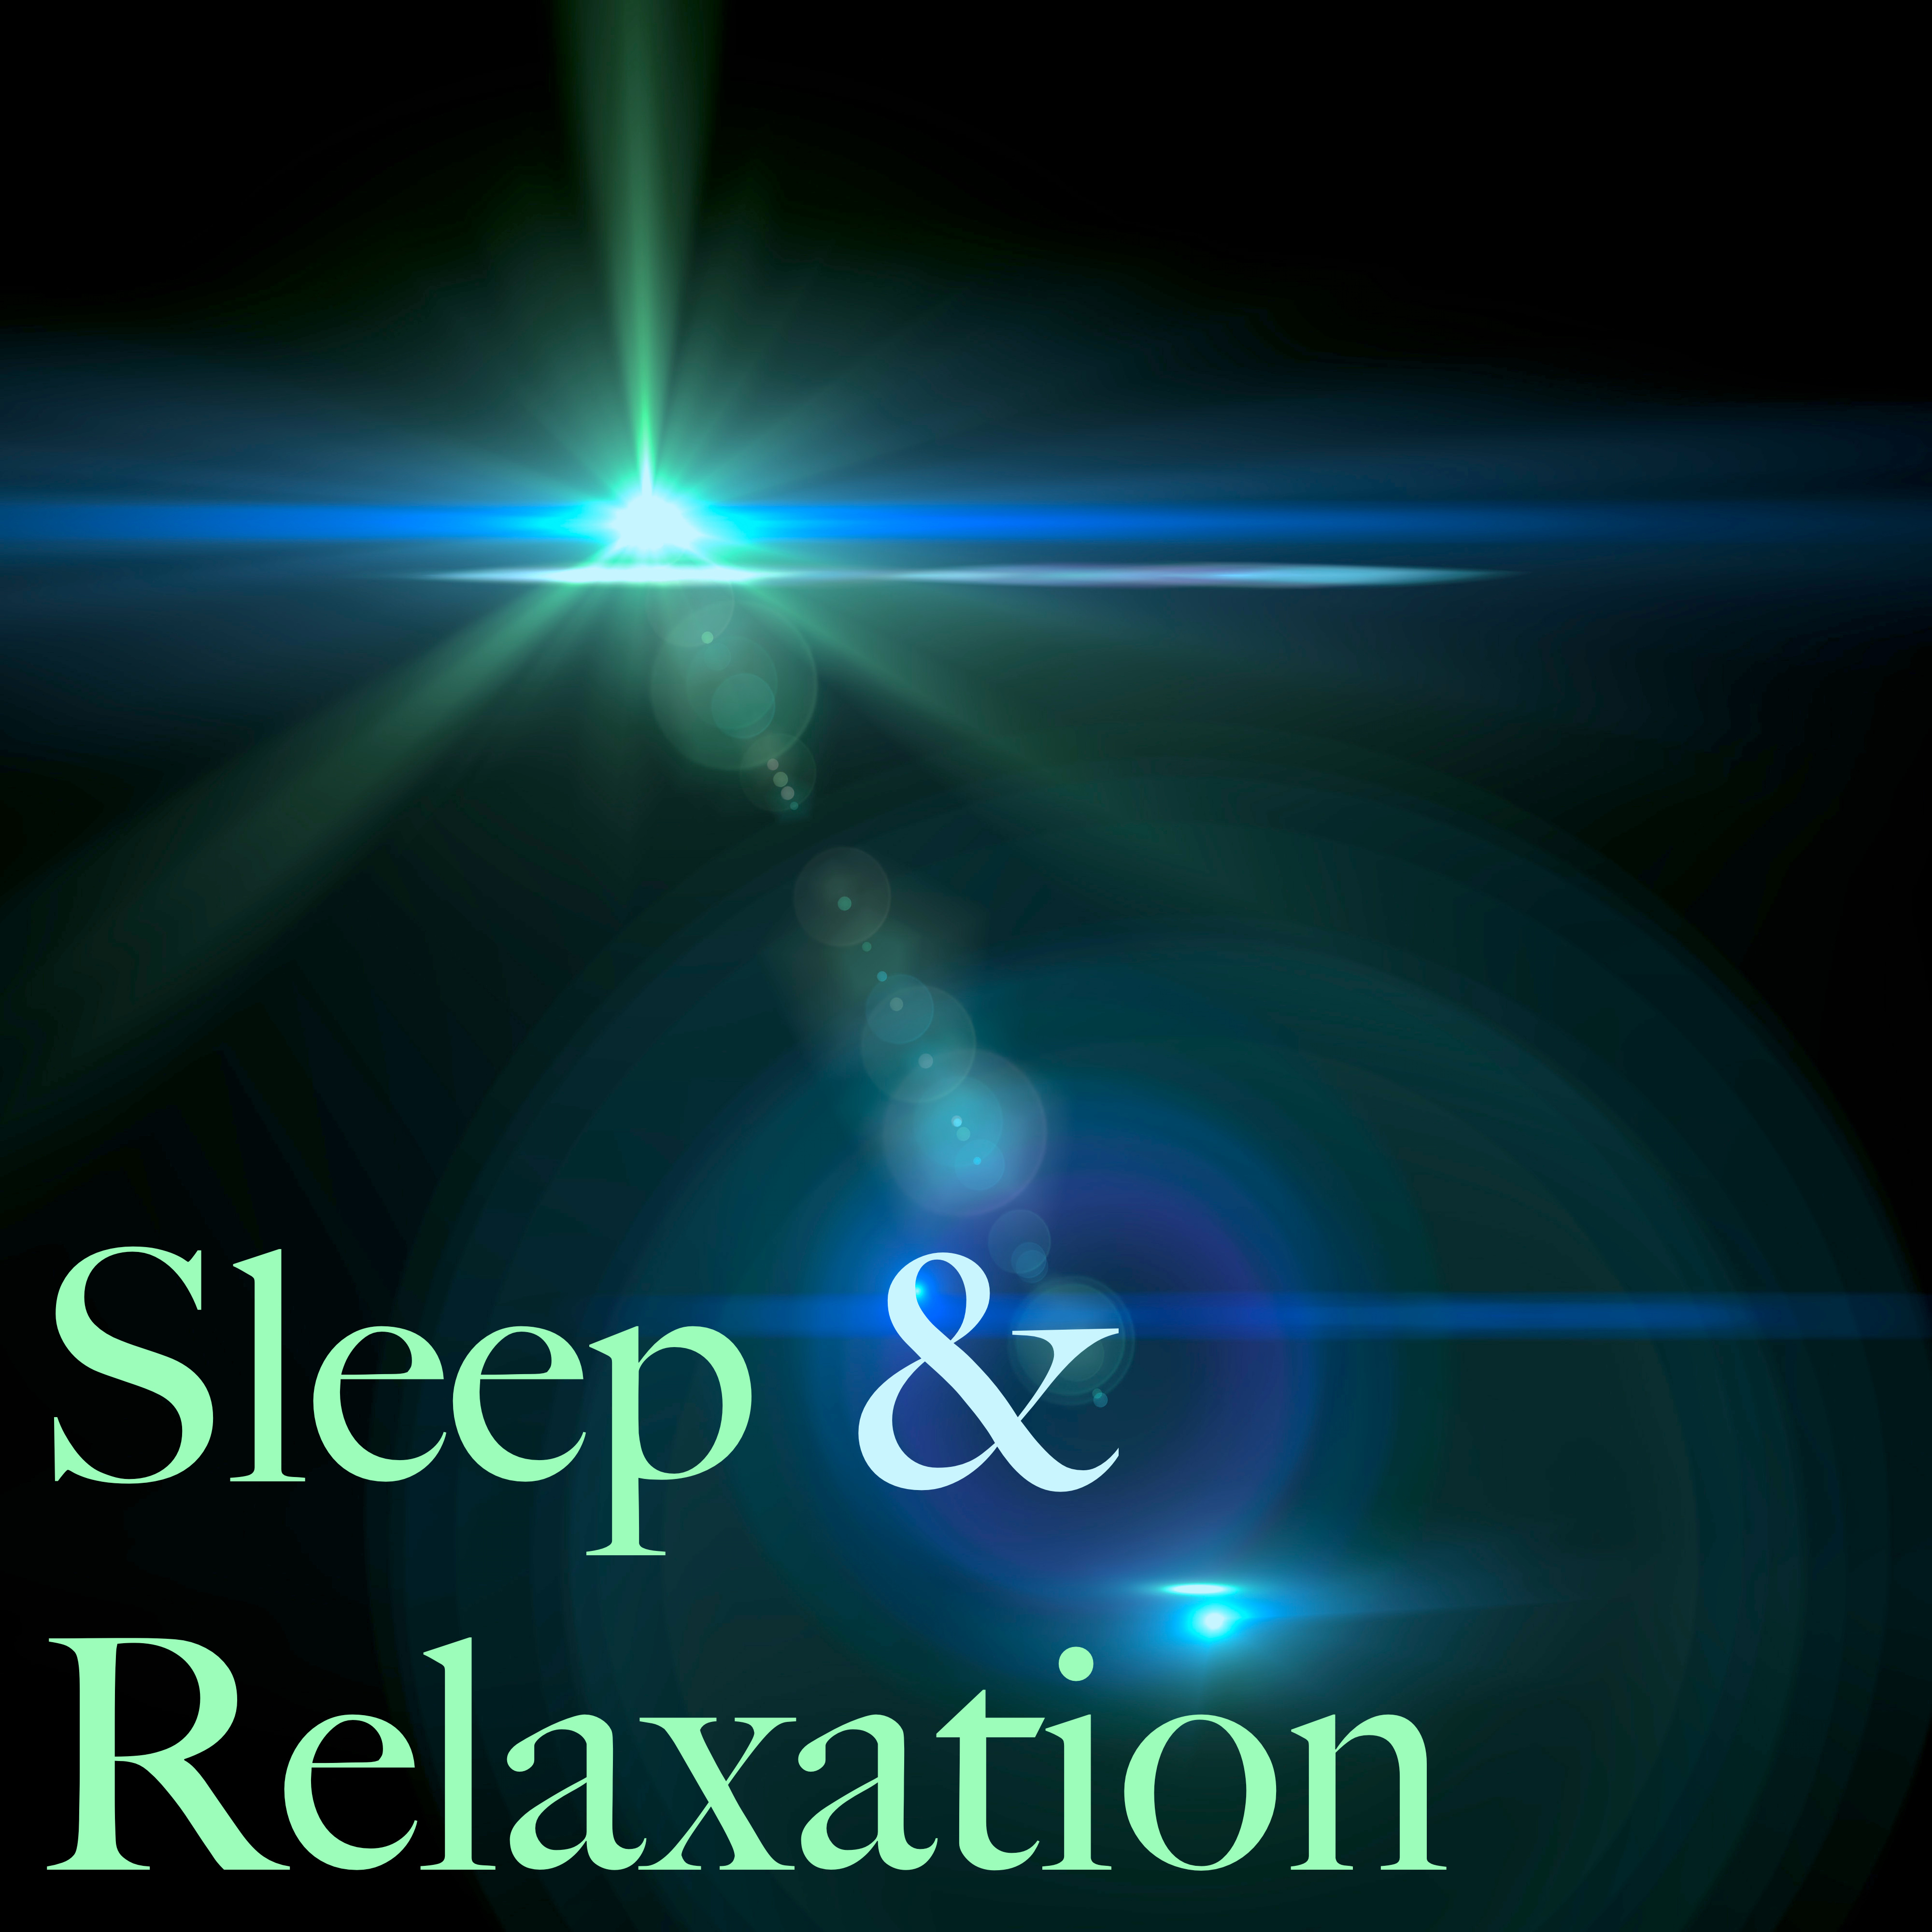 Sleep & Relaxation Music – Rest, Stress Reduction, Natural Sleep Aid, Music Therapy, Sleep Meditation & Sweet Dreams